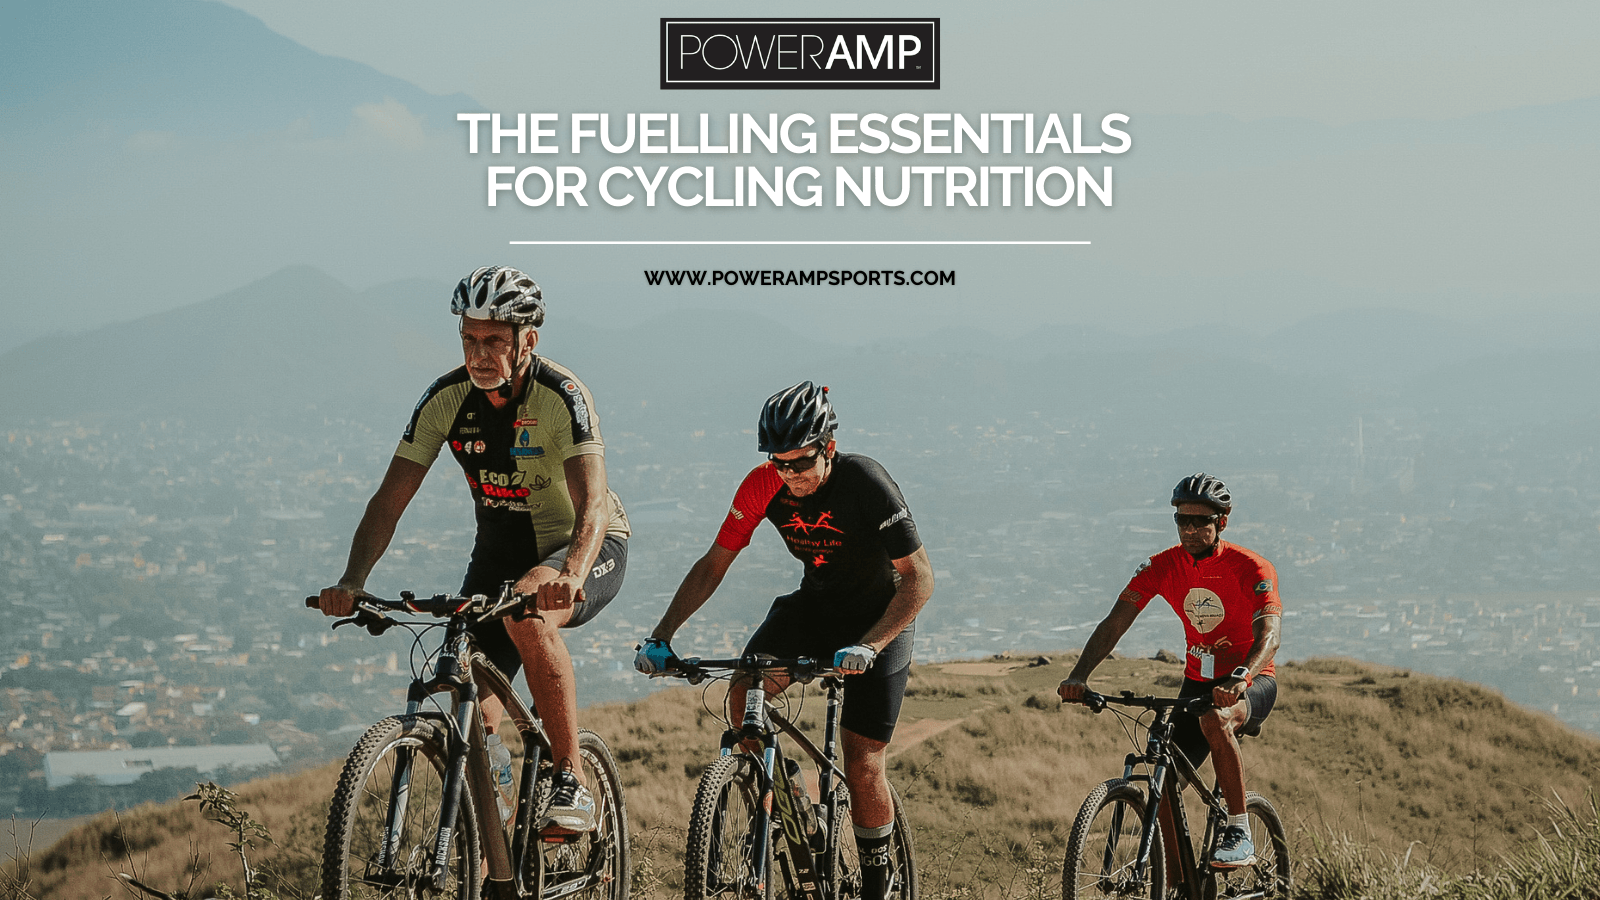 The Fuelling Essentials for Cycling Nutrition